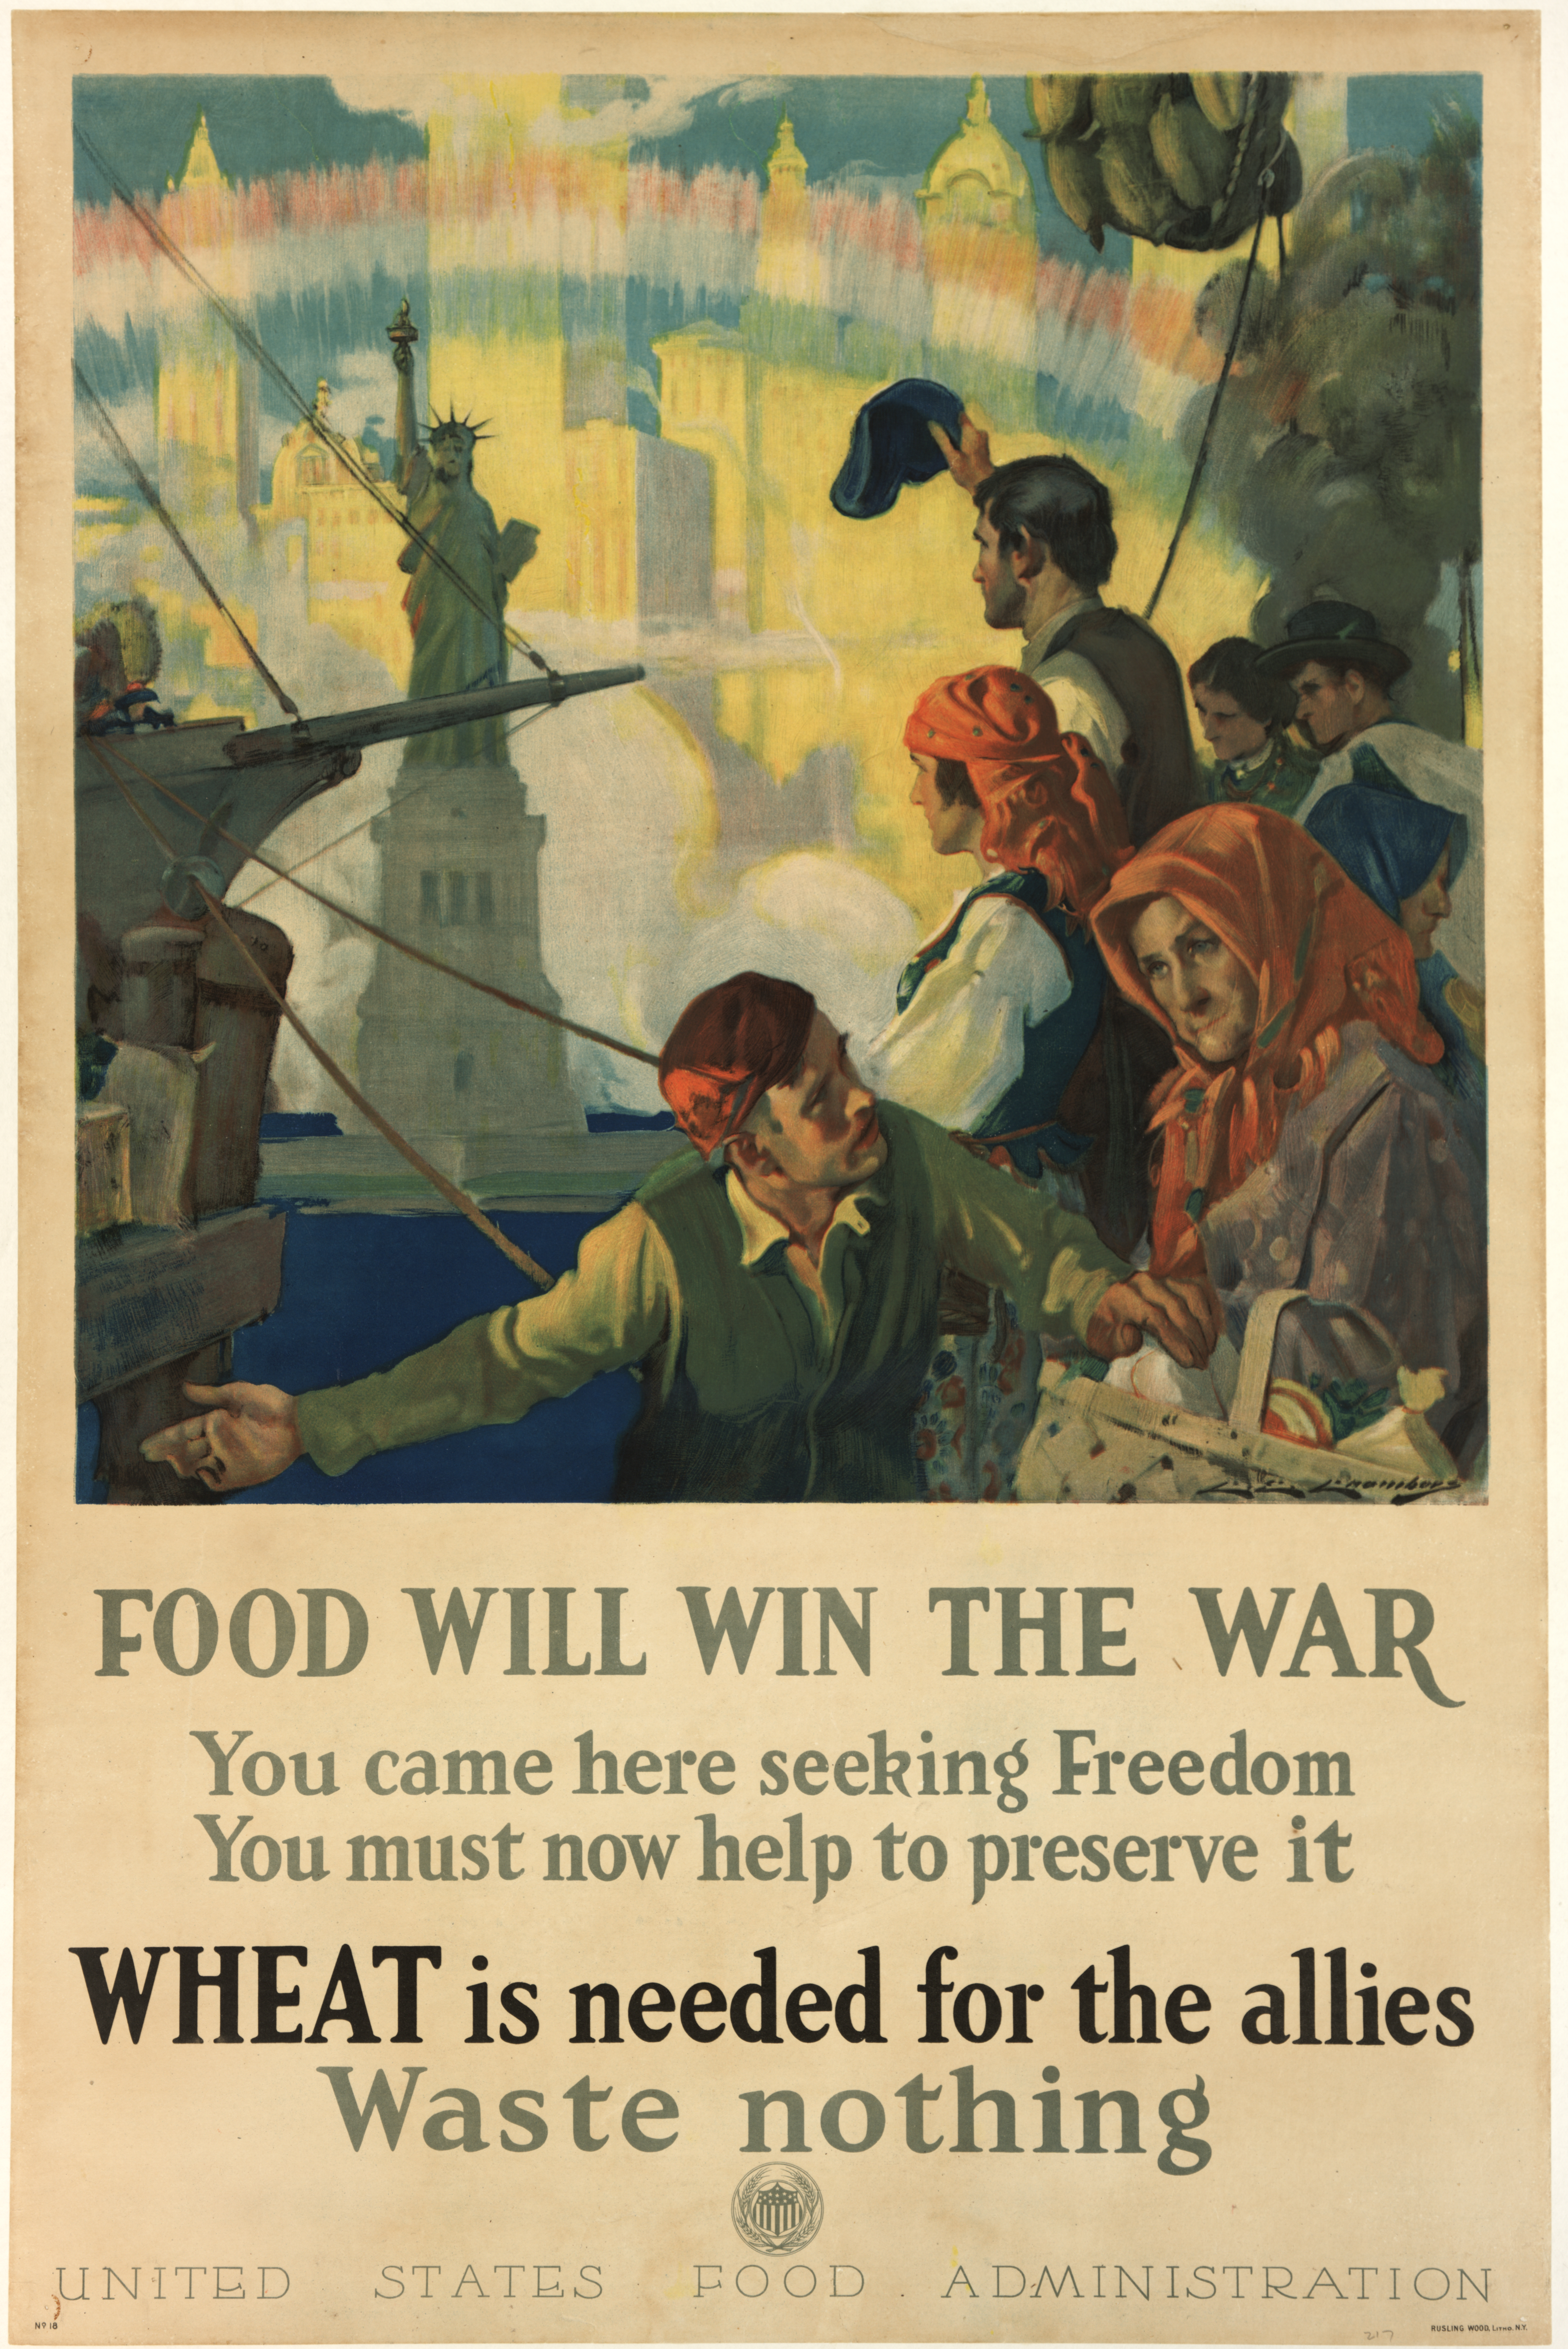 Color poster by Charles E. Chambers, 1917 (Gilder Lehrman Institute, GLC09522)